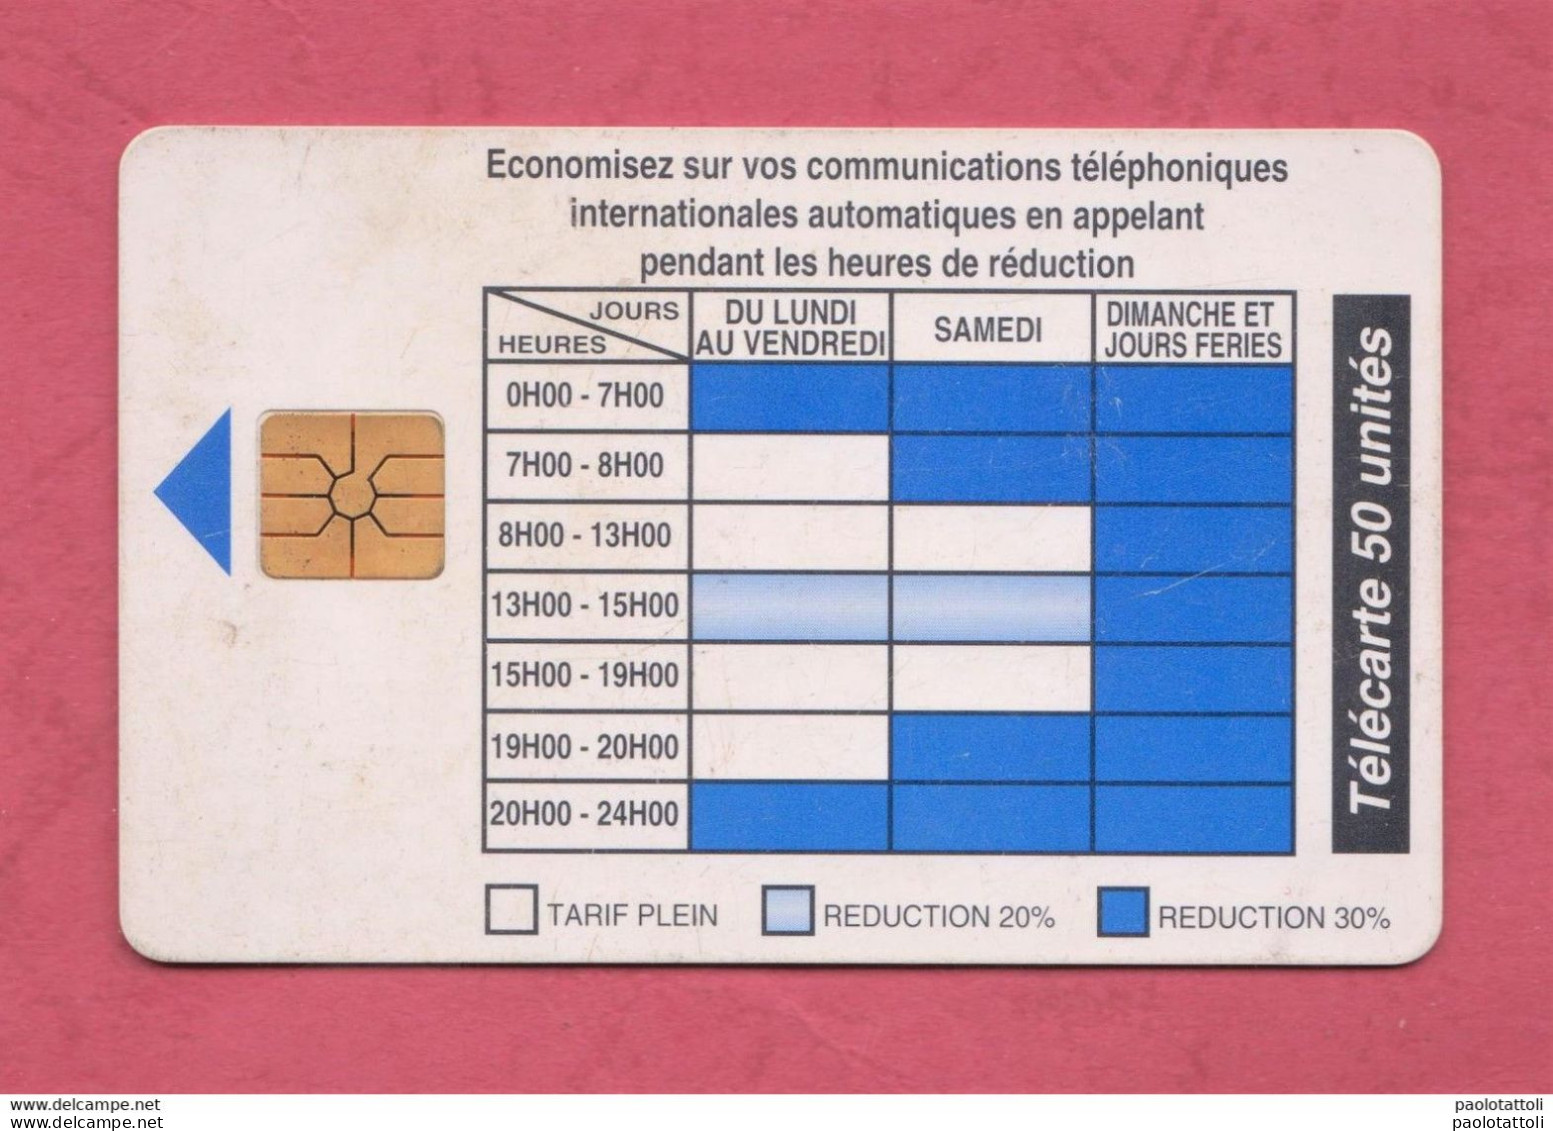 Benin- PTT- Used Phone Card With Chip, 50 Units- Tariff Timetable, Fasce Orarie.Exp. 9.1996 - Bénin